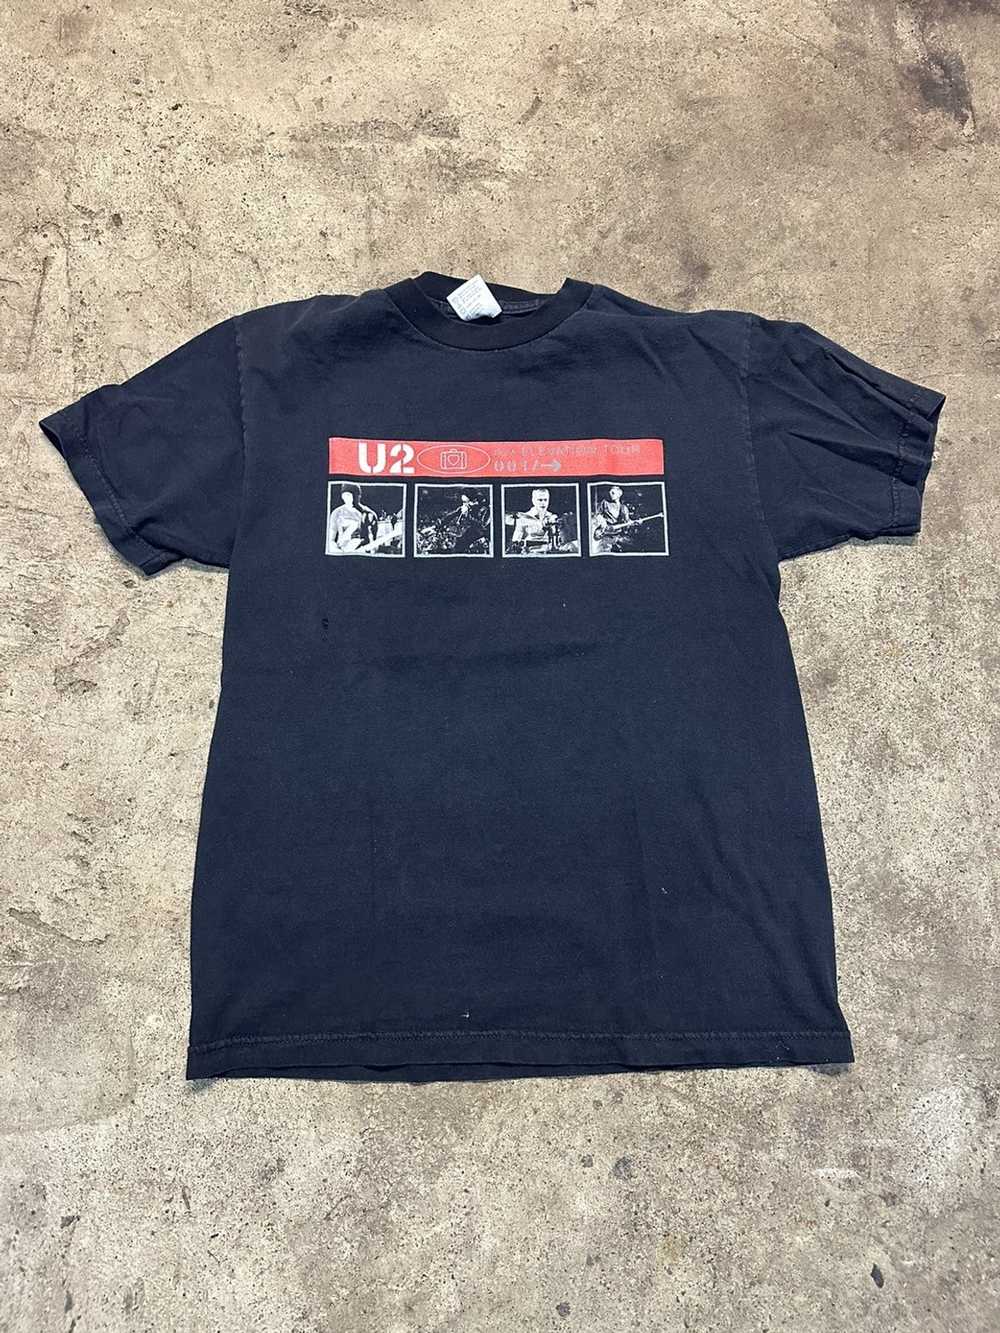 Band Tees × Made In Usa × Vintage AUTHENTIC U2 EL… - image 1